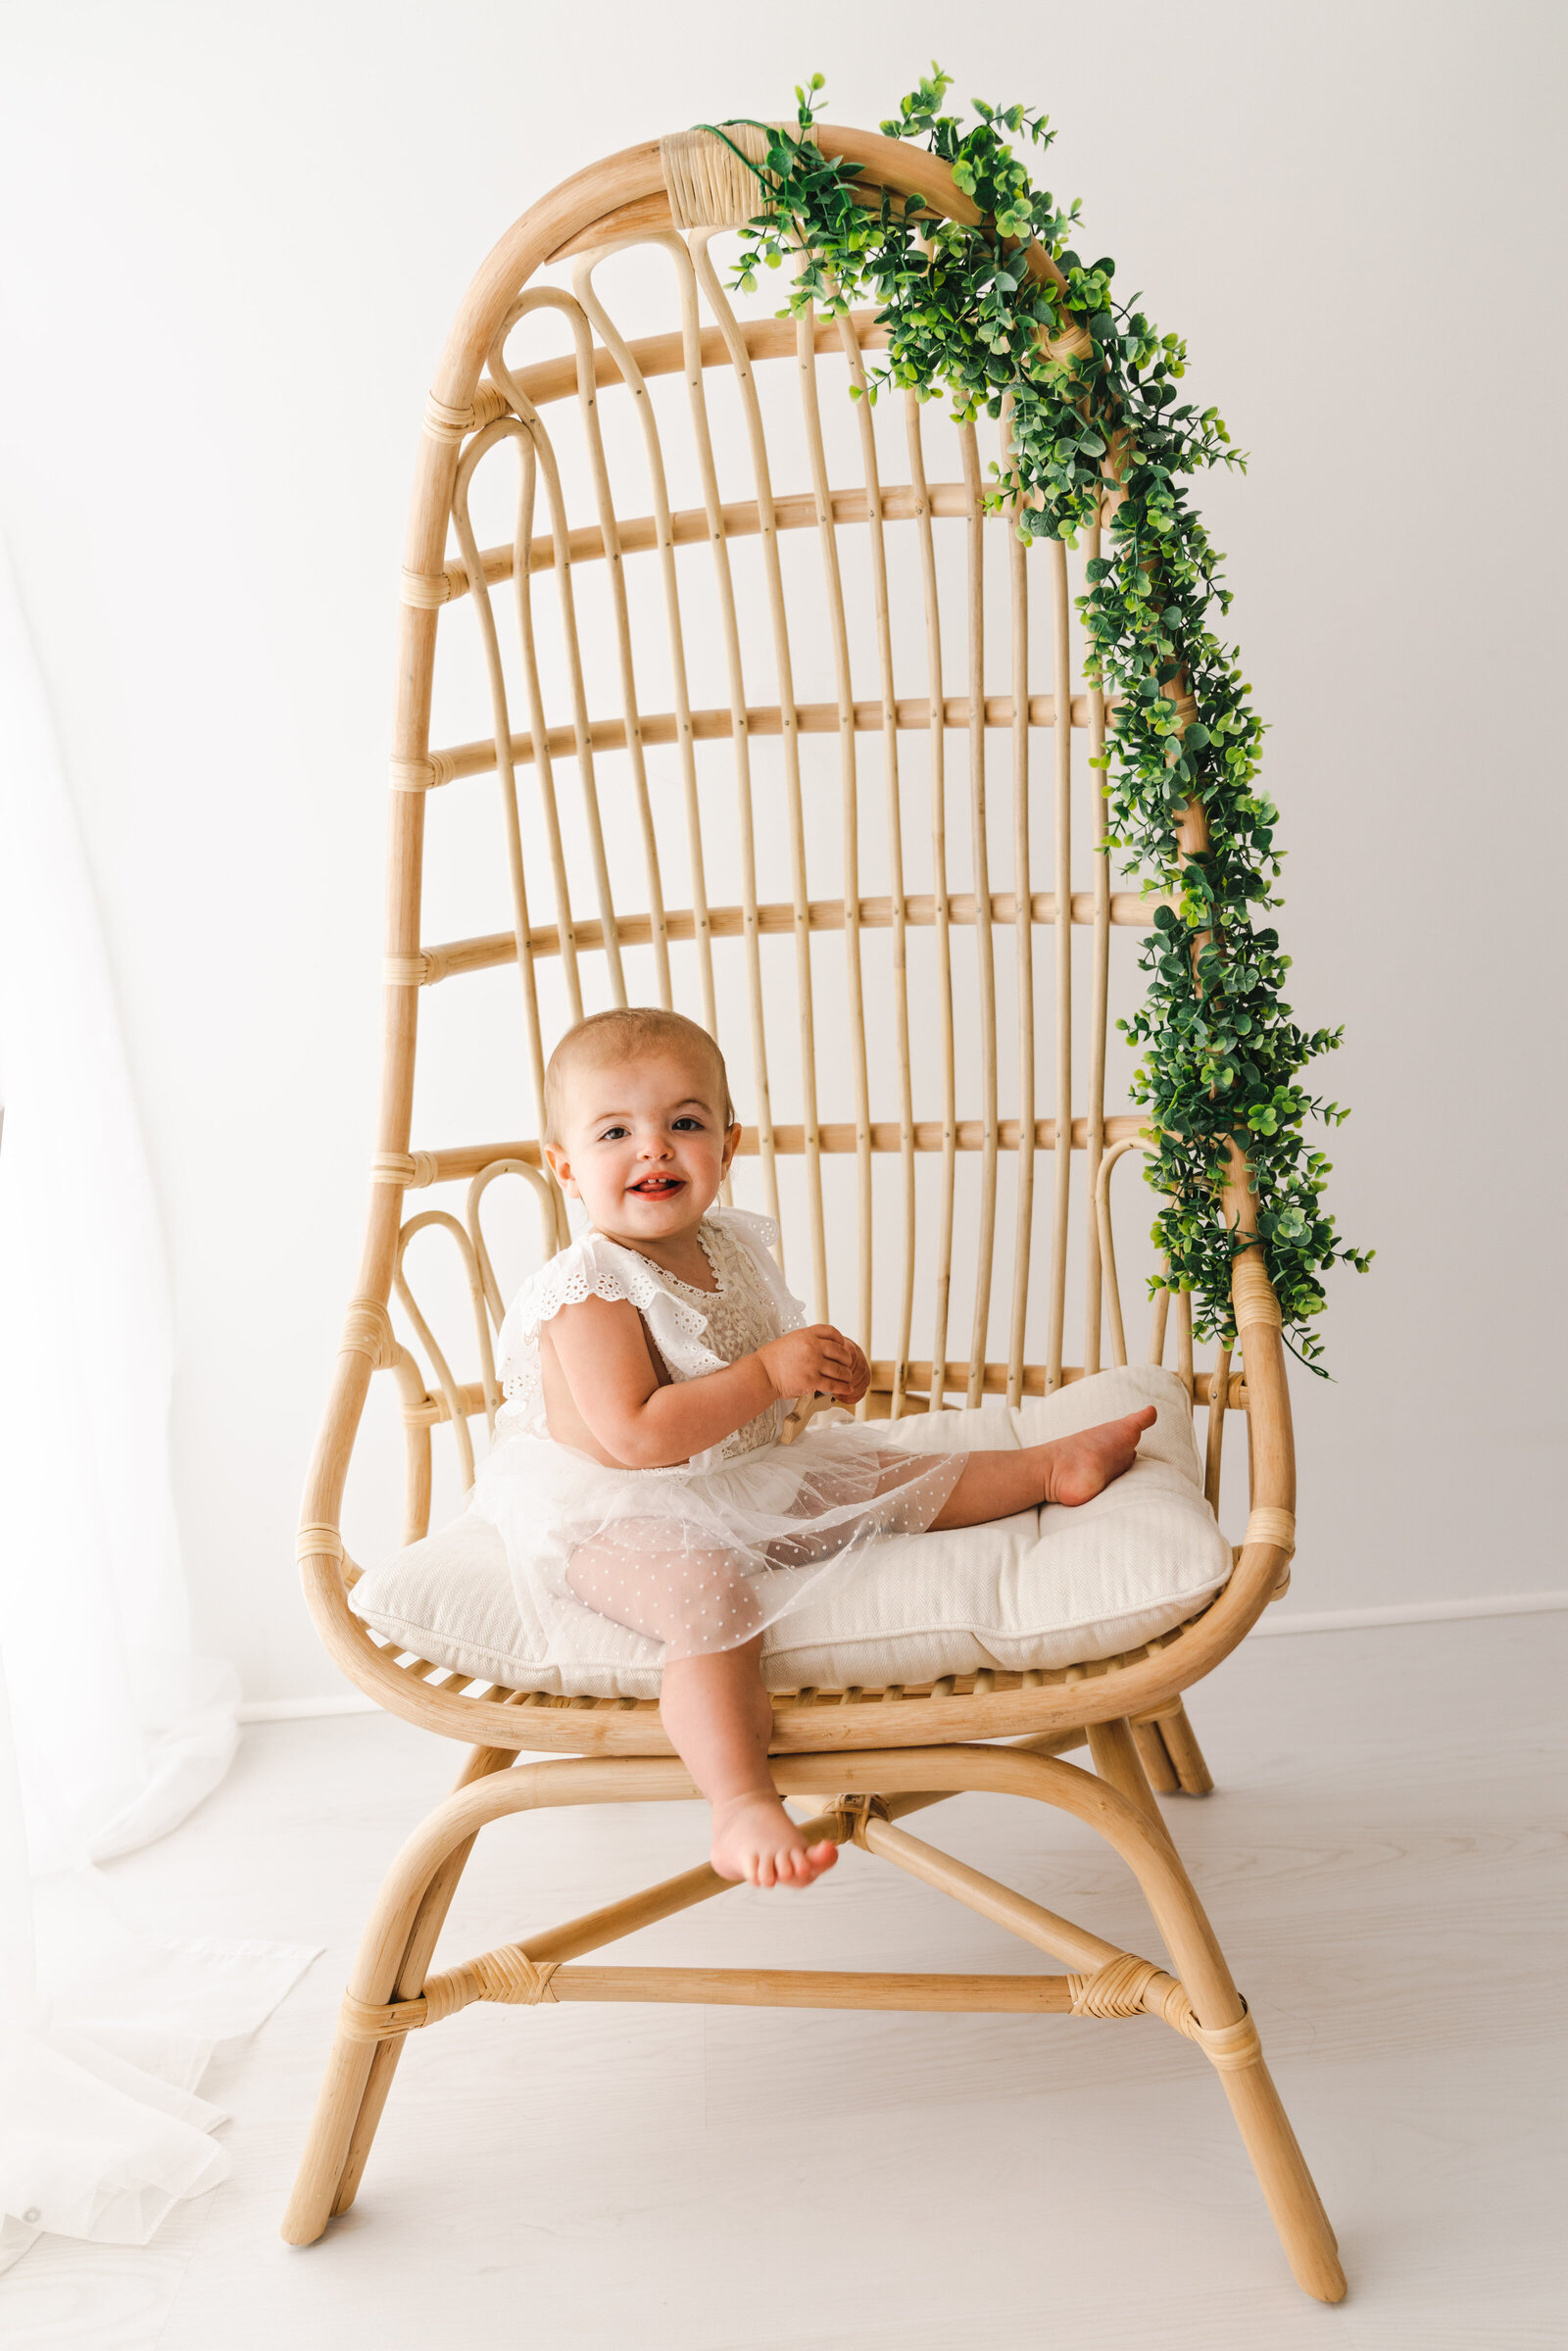 baby sitting on wooden chair smiling